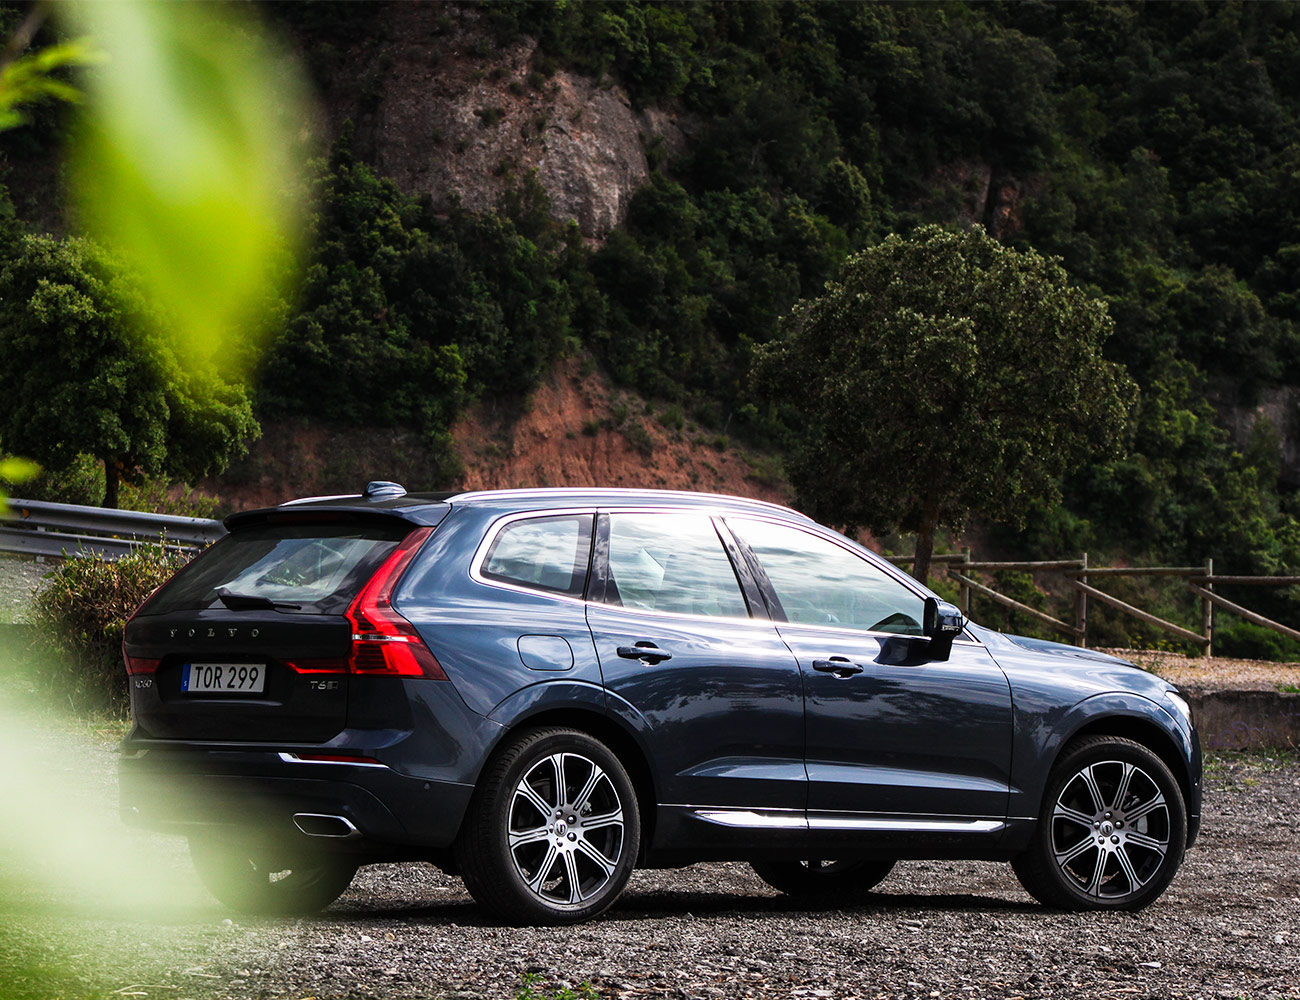 Two Reasons to Like the 2018 Volvo XC60 (And One Major Reason Not To)